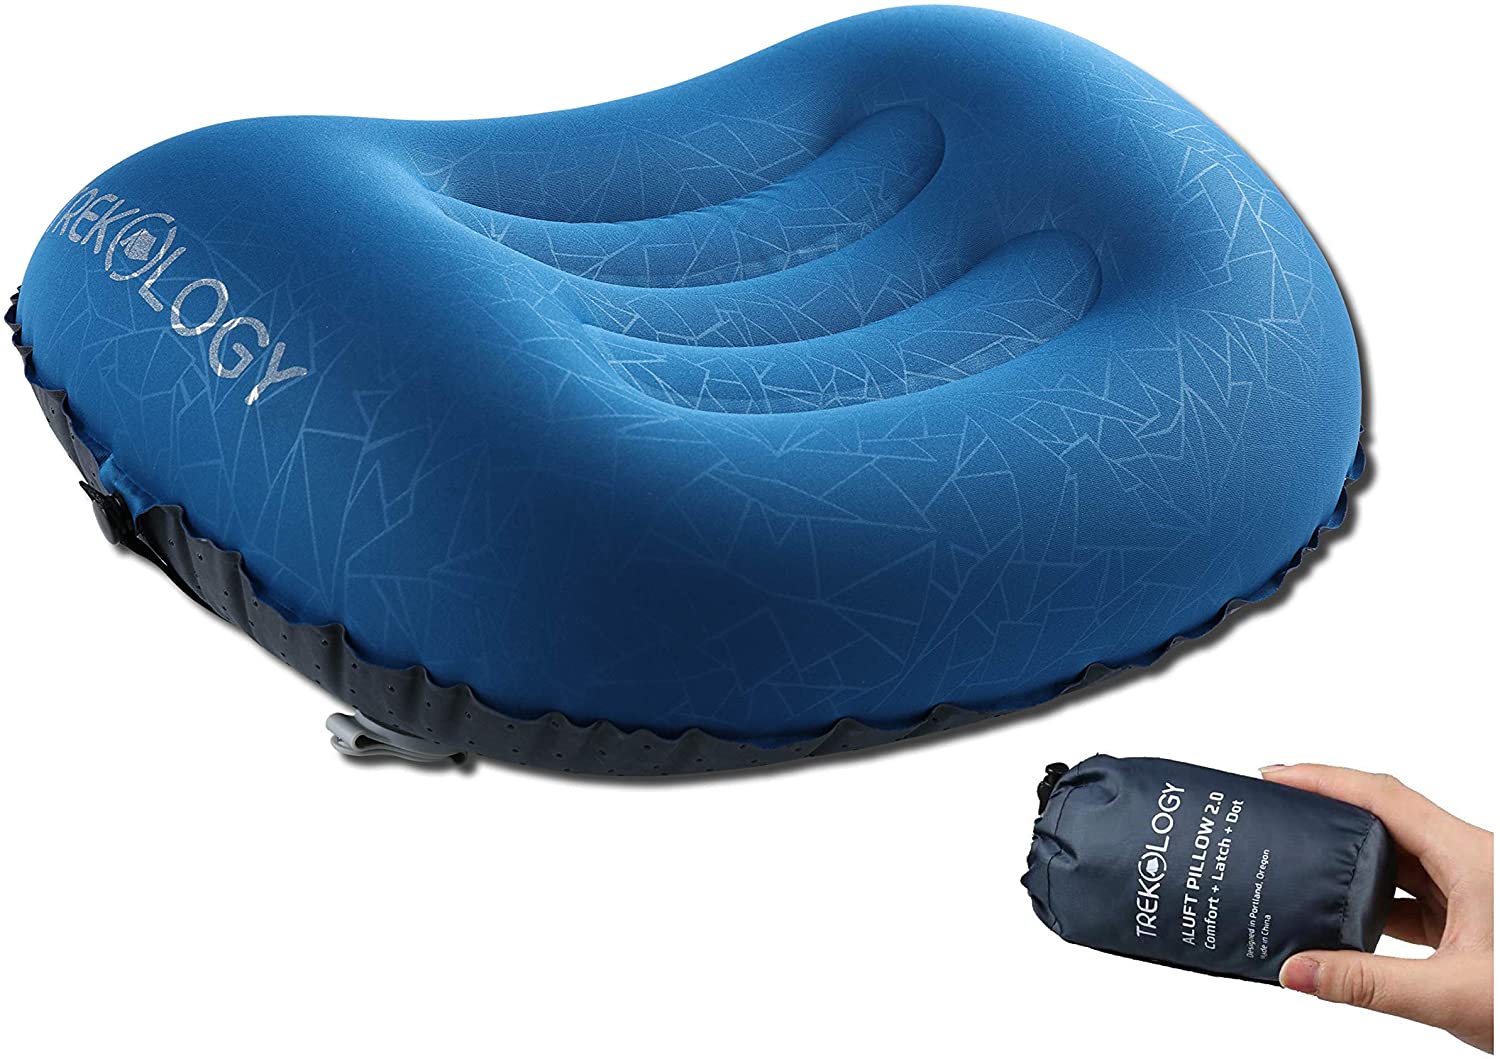 Blue Portable Inflatable Flocked Air Pillow Neck and Lumbar Support Squared Inflatable Pillow Cushion for Rest Bed Travel Cushion Camping